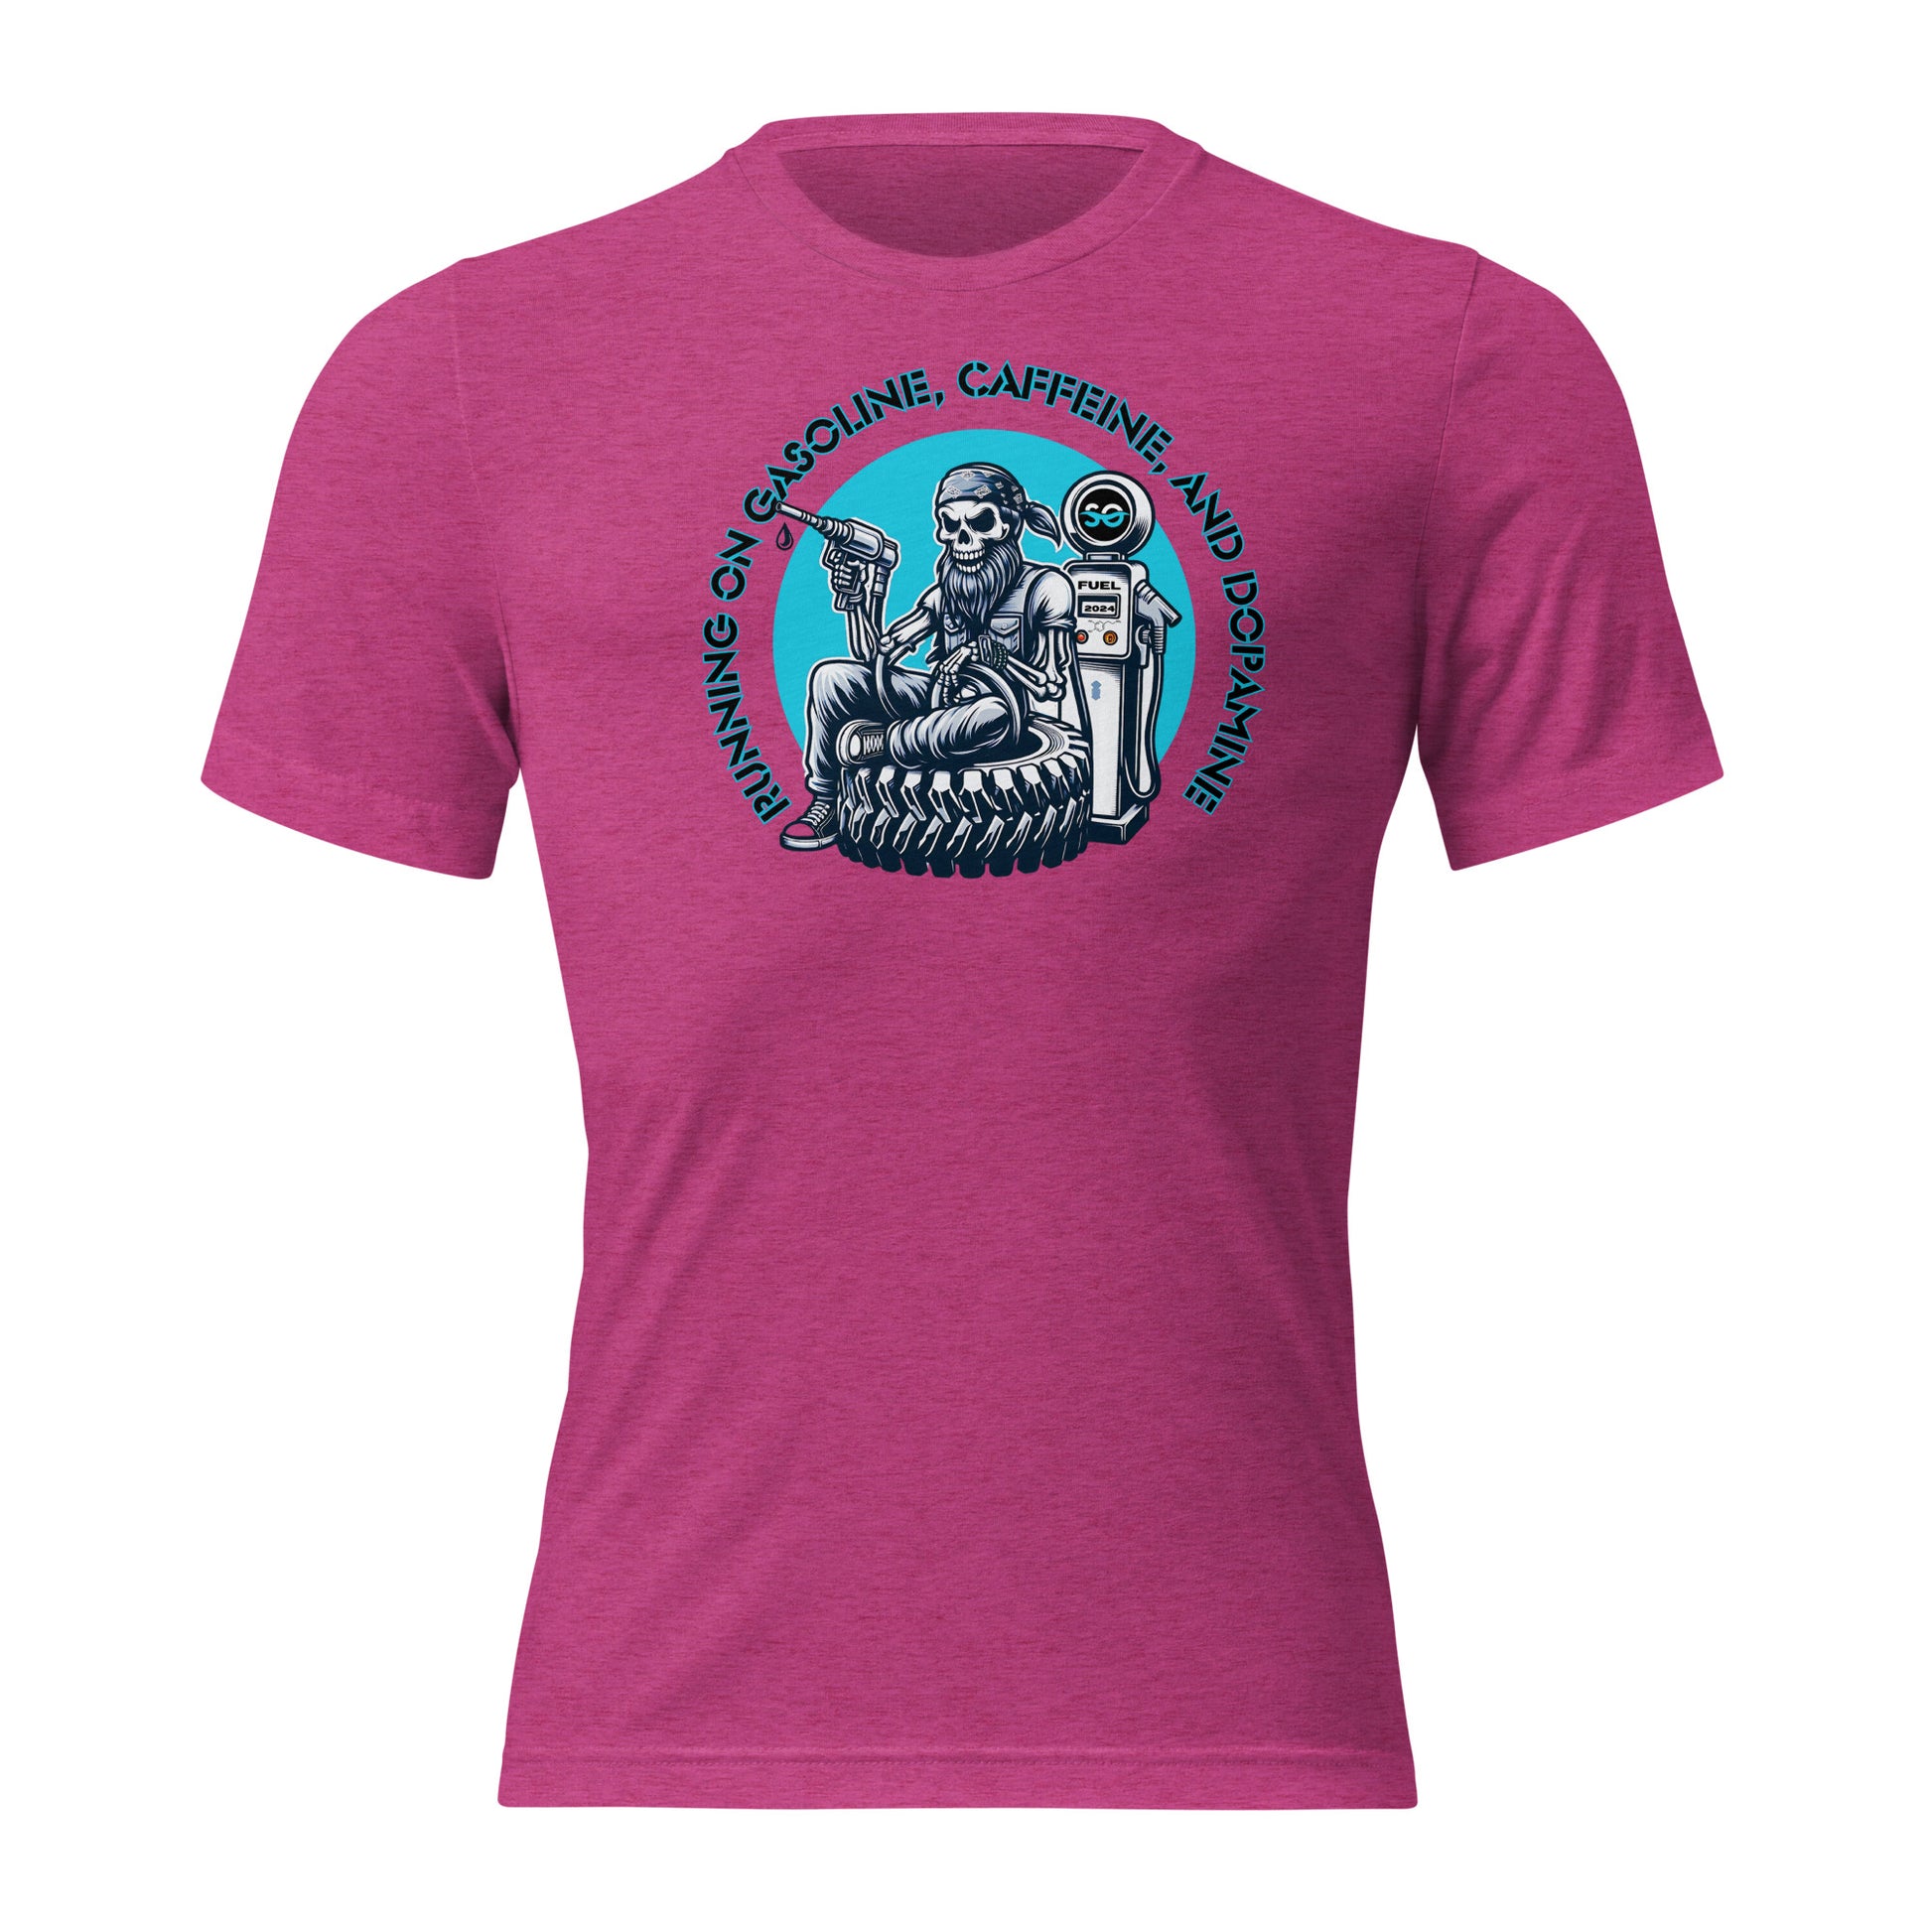 a women's pink t - shirt with a picture of a man on a